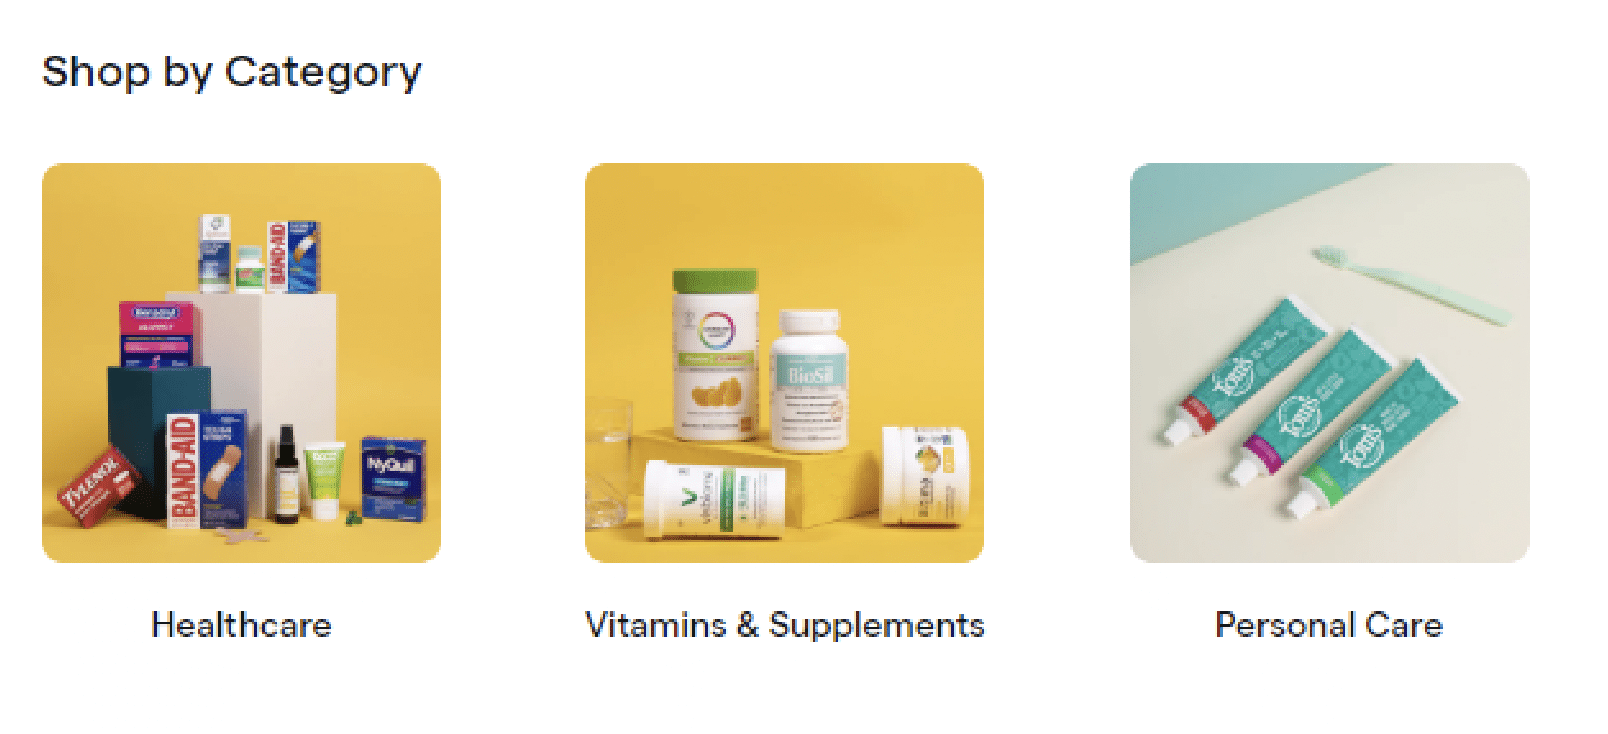 Medly healthcare, vitamins & supplements, and personal care categories with images showing respective products.